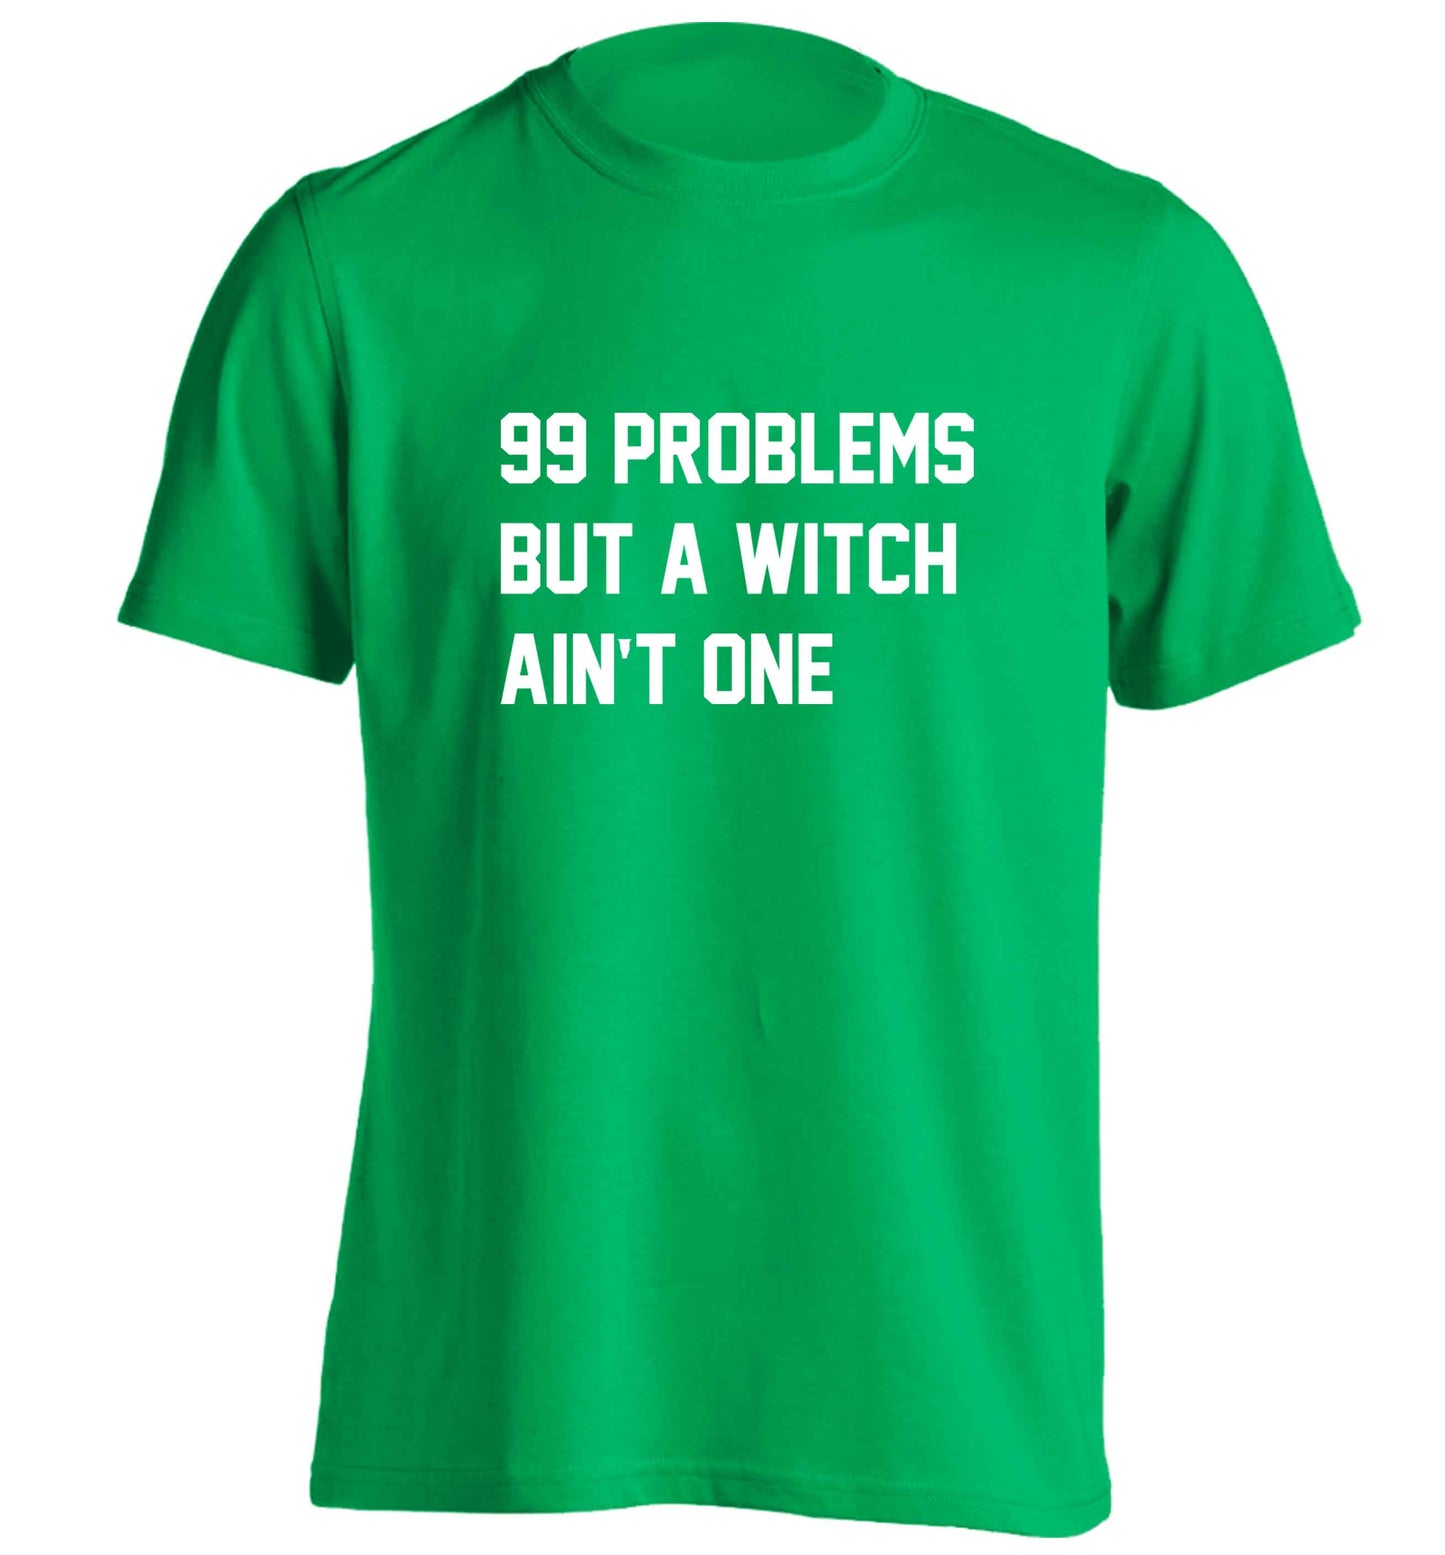 99 Problems but a witch aint one adults unisex green Tshirt 2XL